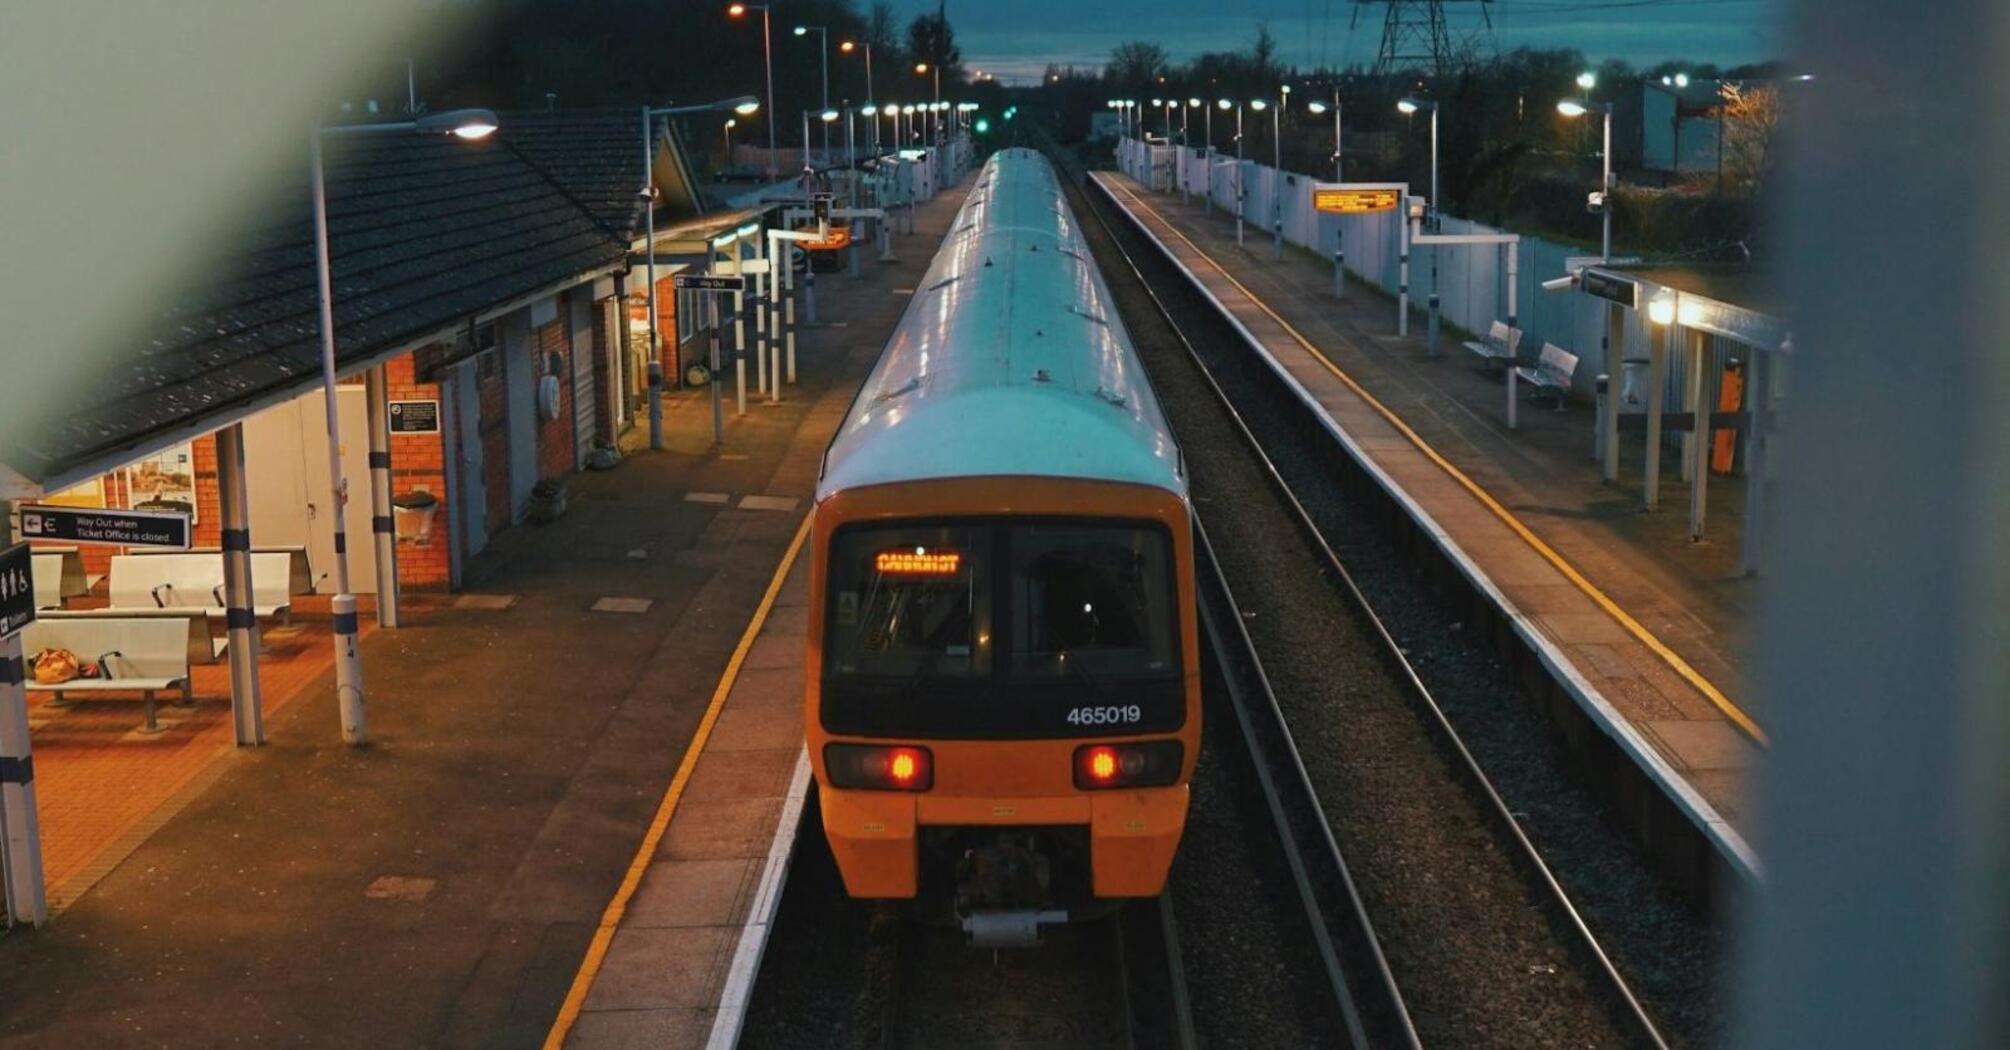 A train at a dimly lit station platform during the evening